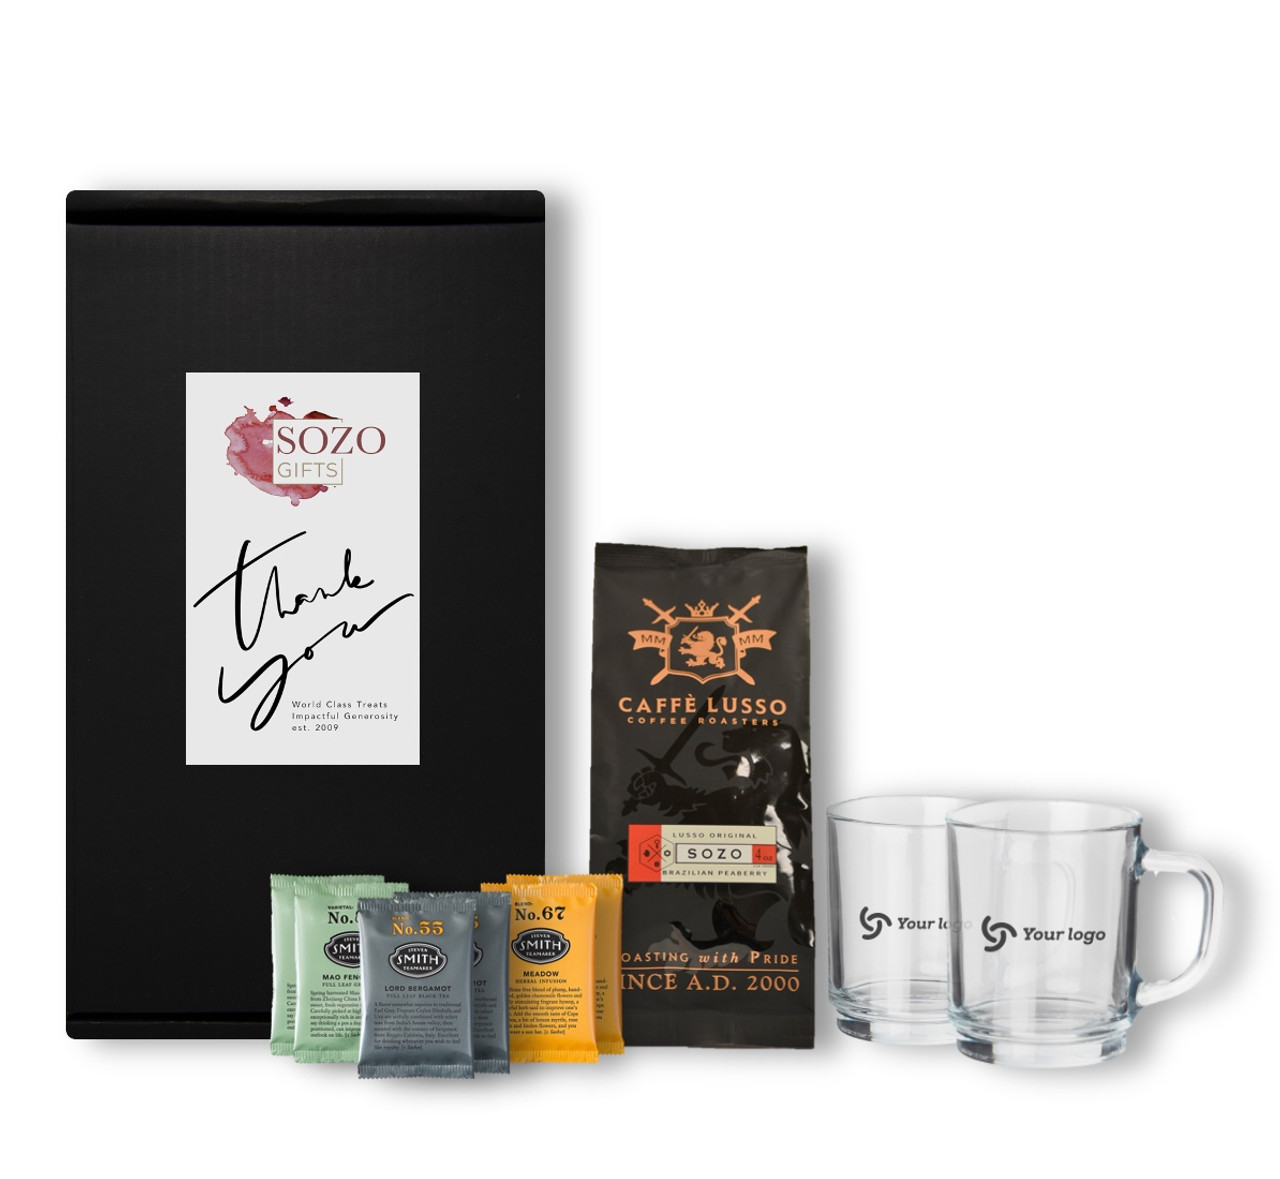 https://cdn11.bigcommerce.com/s-kgihy4hax9/images/stencil/1280x1280/products/236/894/Sozo_Gifts_Small_Coffee_Tea_and_Etched_Mugs_Gift_Box__83710.1632513588.jpg?c=1